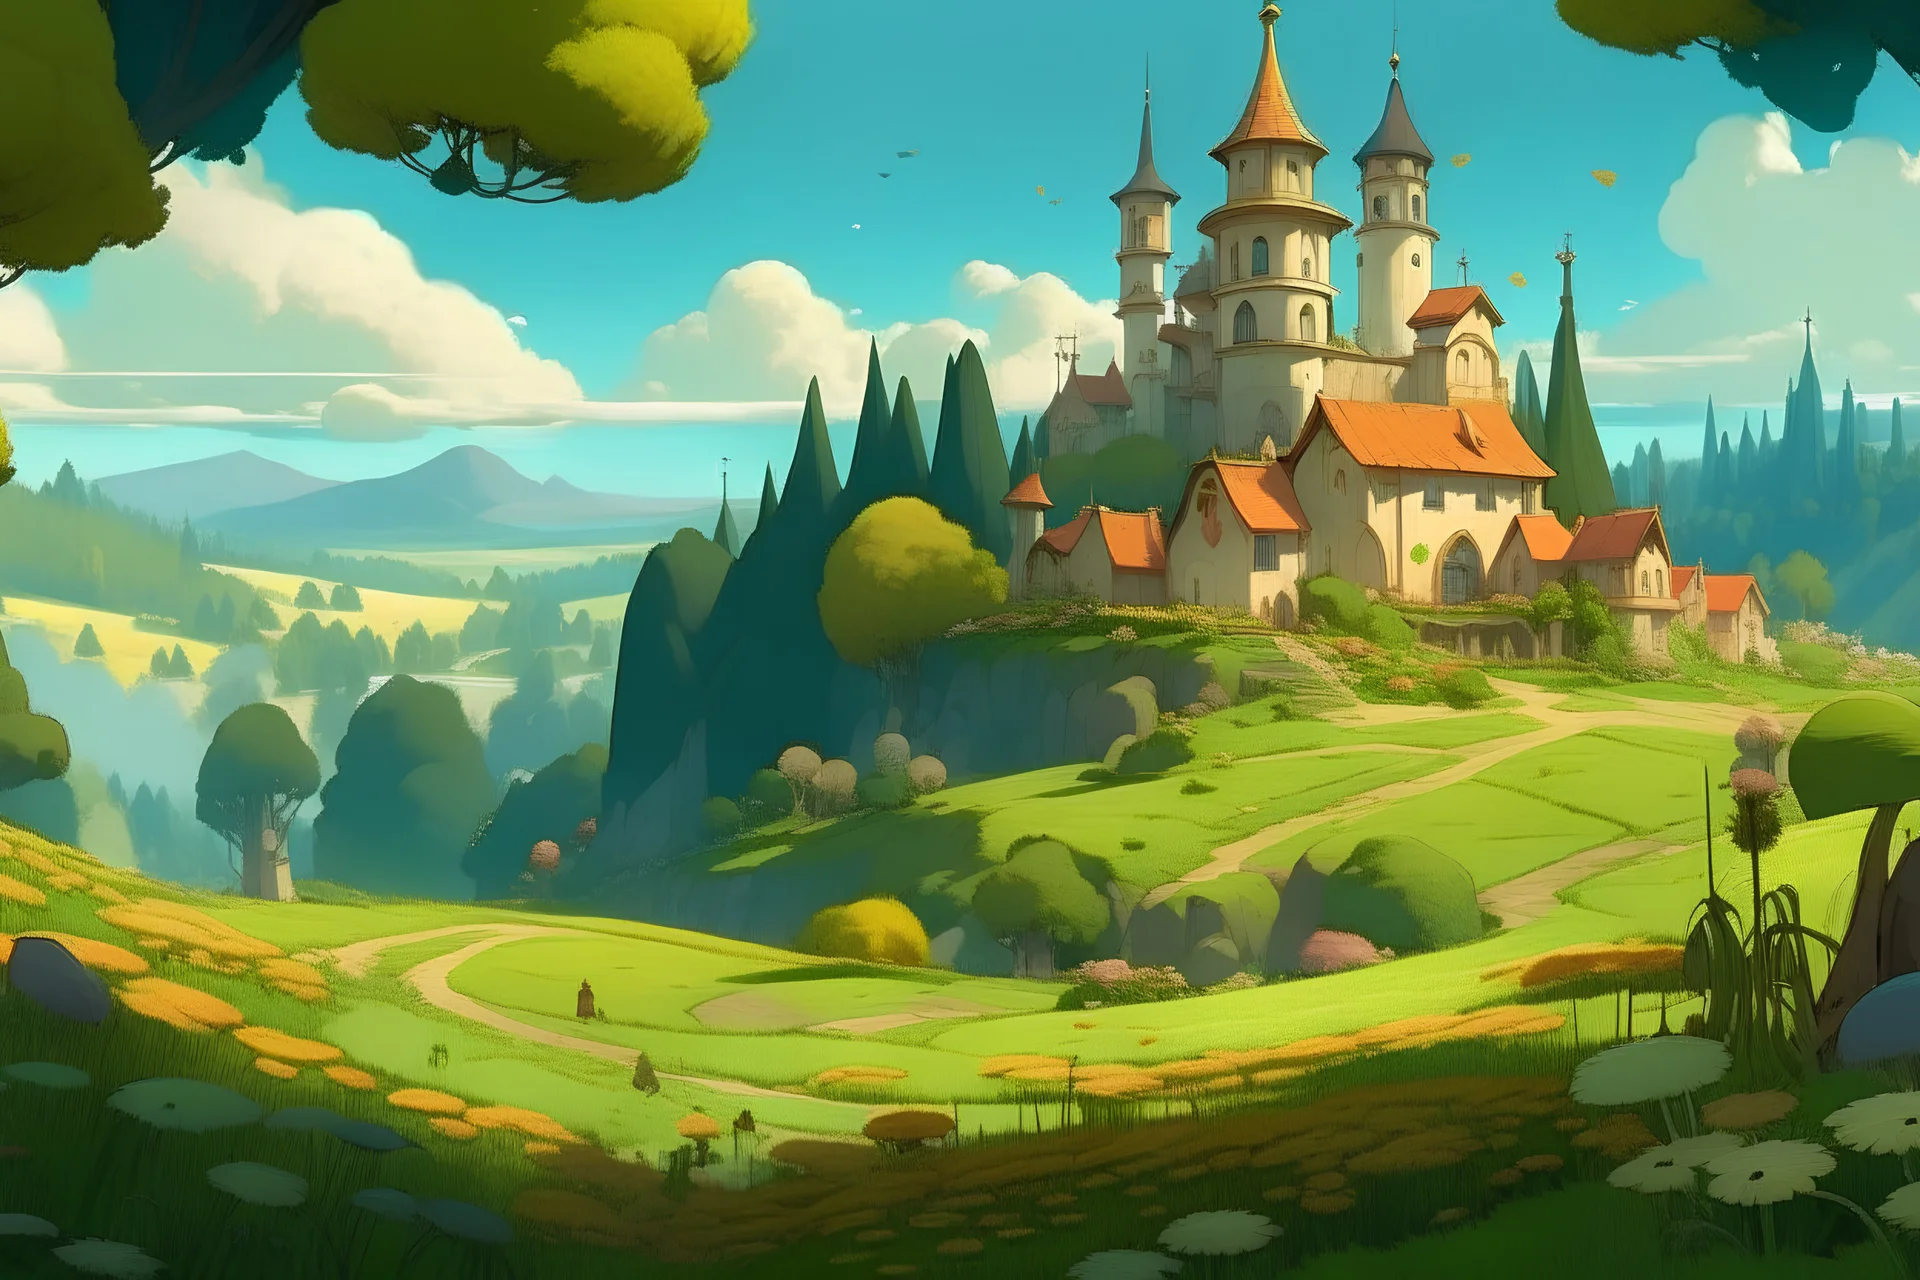 A 3D stylized environment art of a kingdom surrounded by flowery meadows and multiple vineyards, windmills are scattered there, in the style of Ghibli